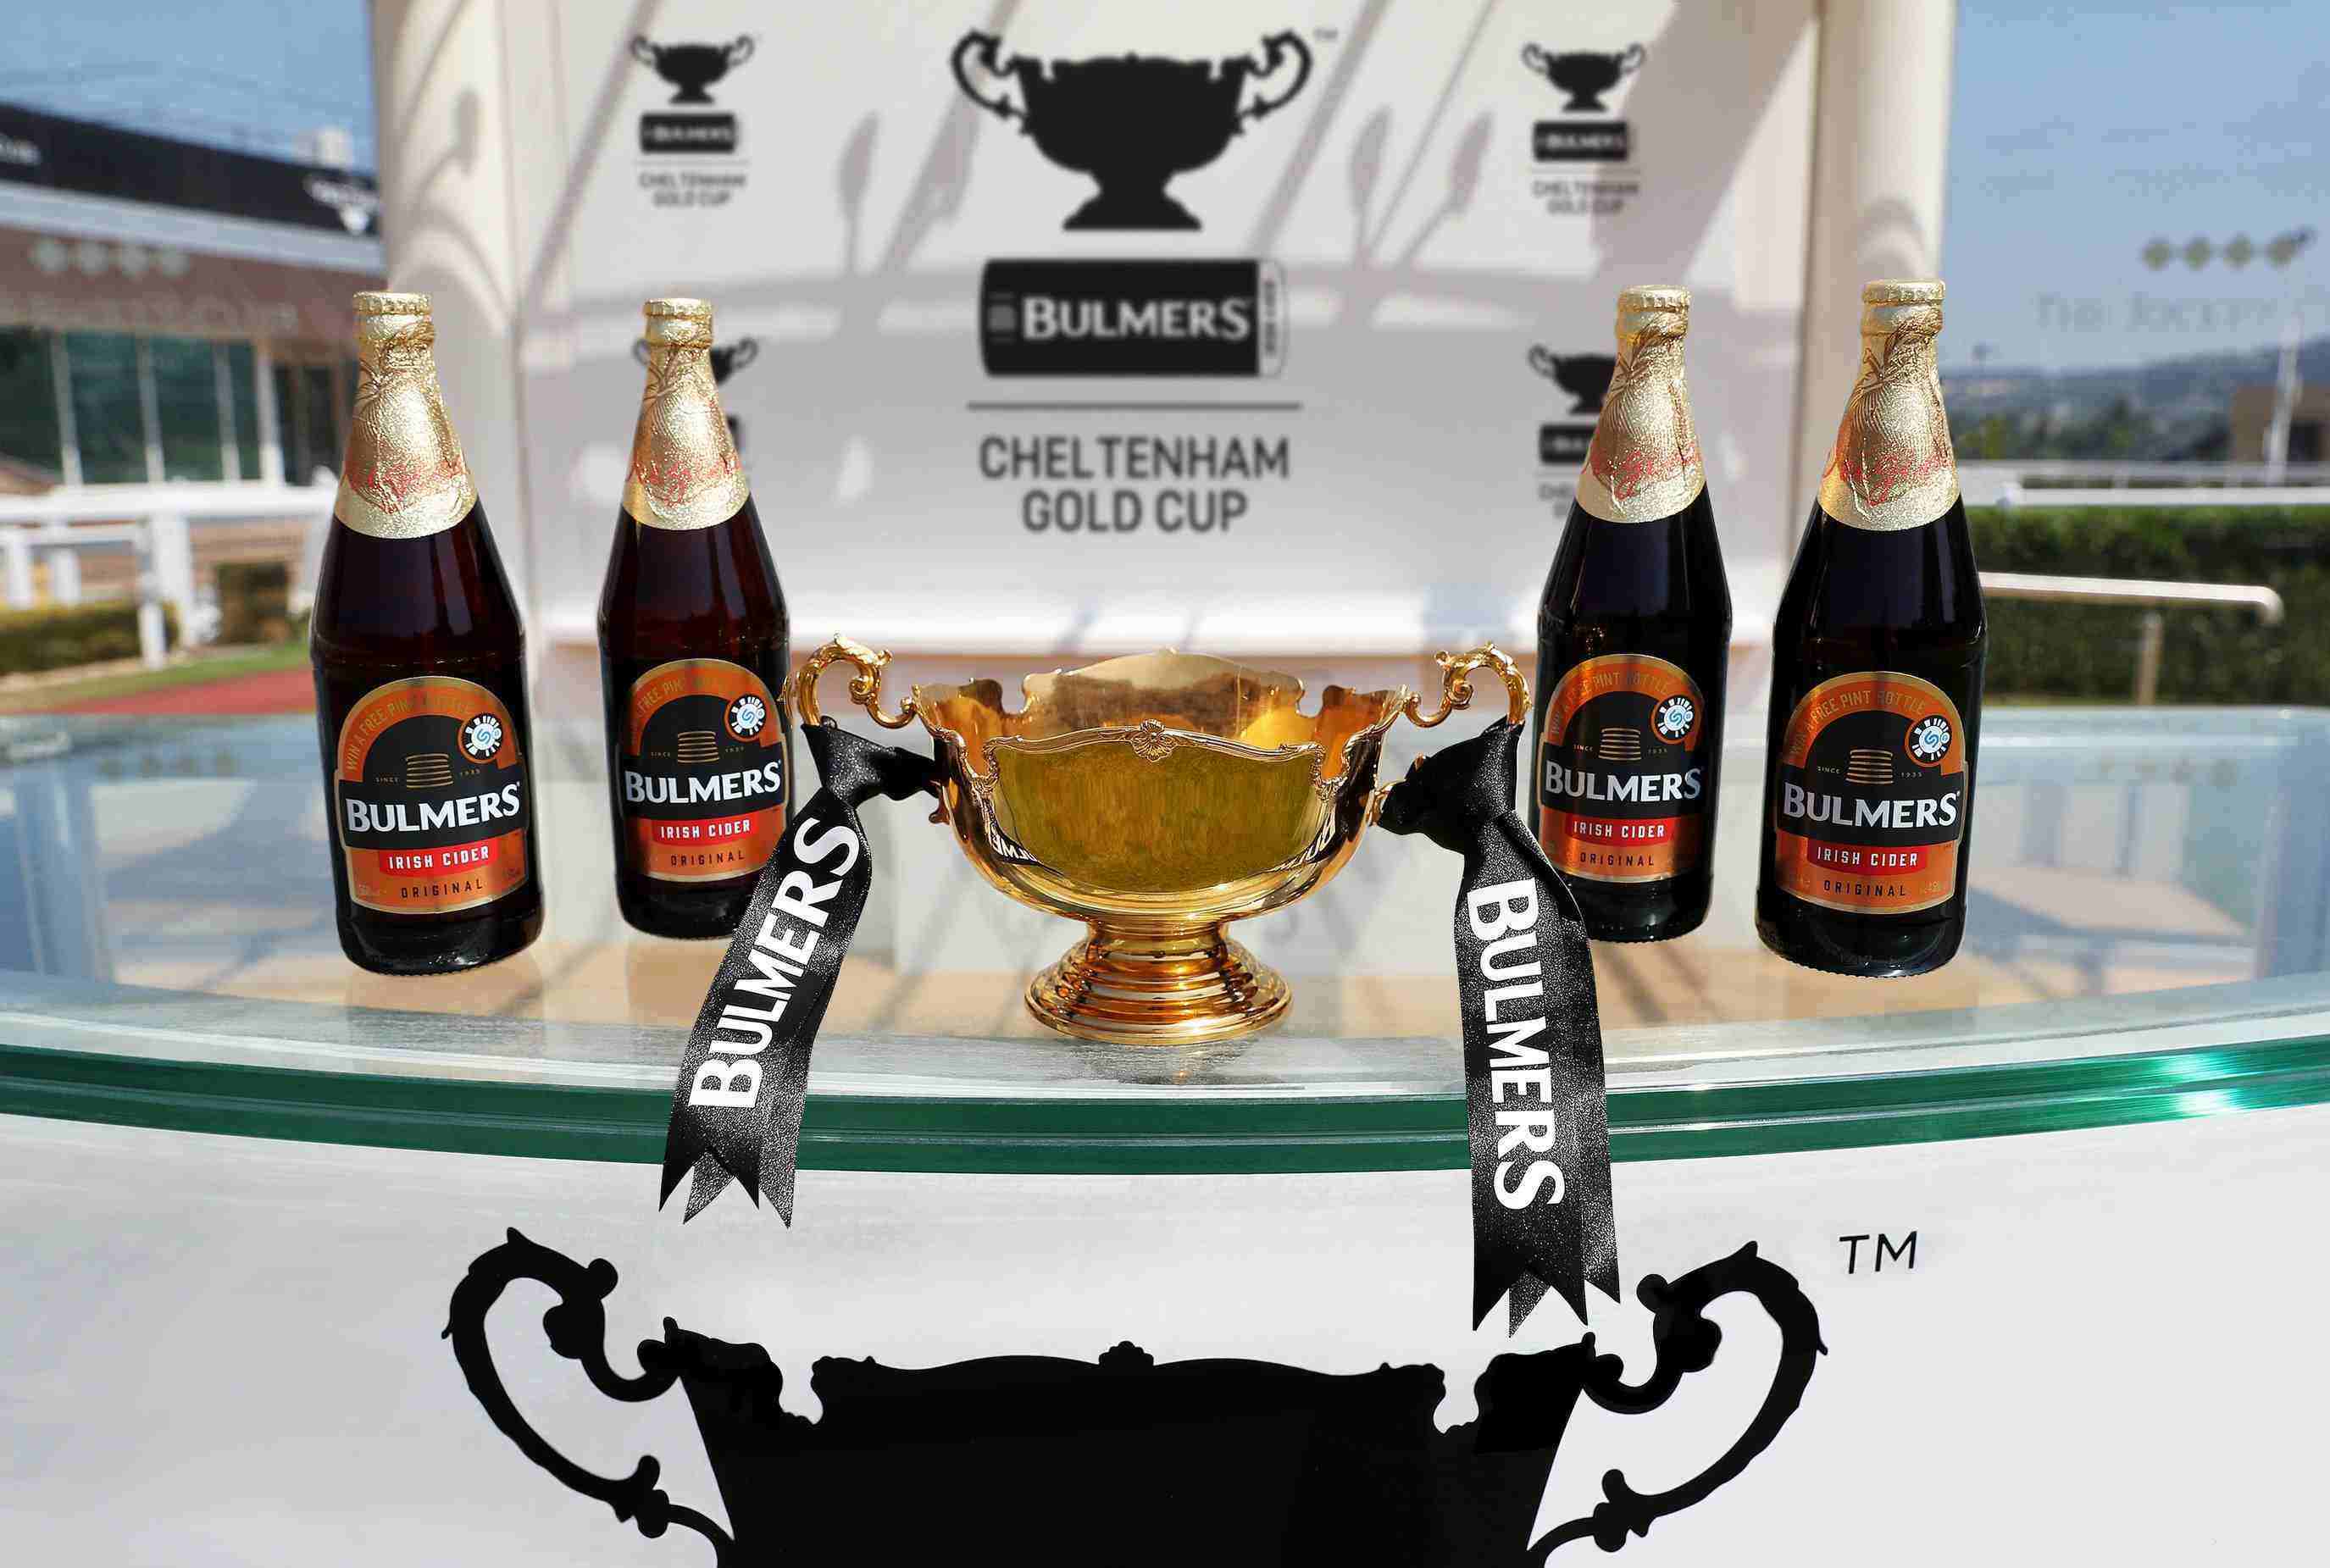 From next March the Cheltenham Gold Cup will be known as the ‘Magners Cheltenham Gold Cup’ in the UK and internationally and as the ‘Bulmers Cheltenham Gold Cup’ to audiences in the Republic of Ireland.